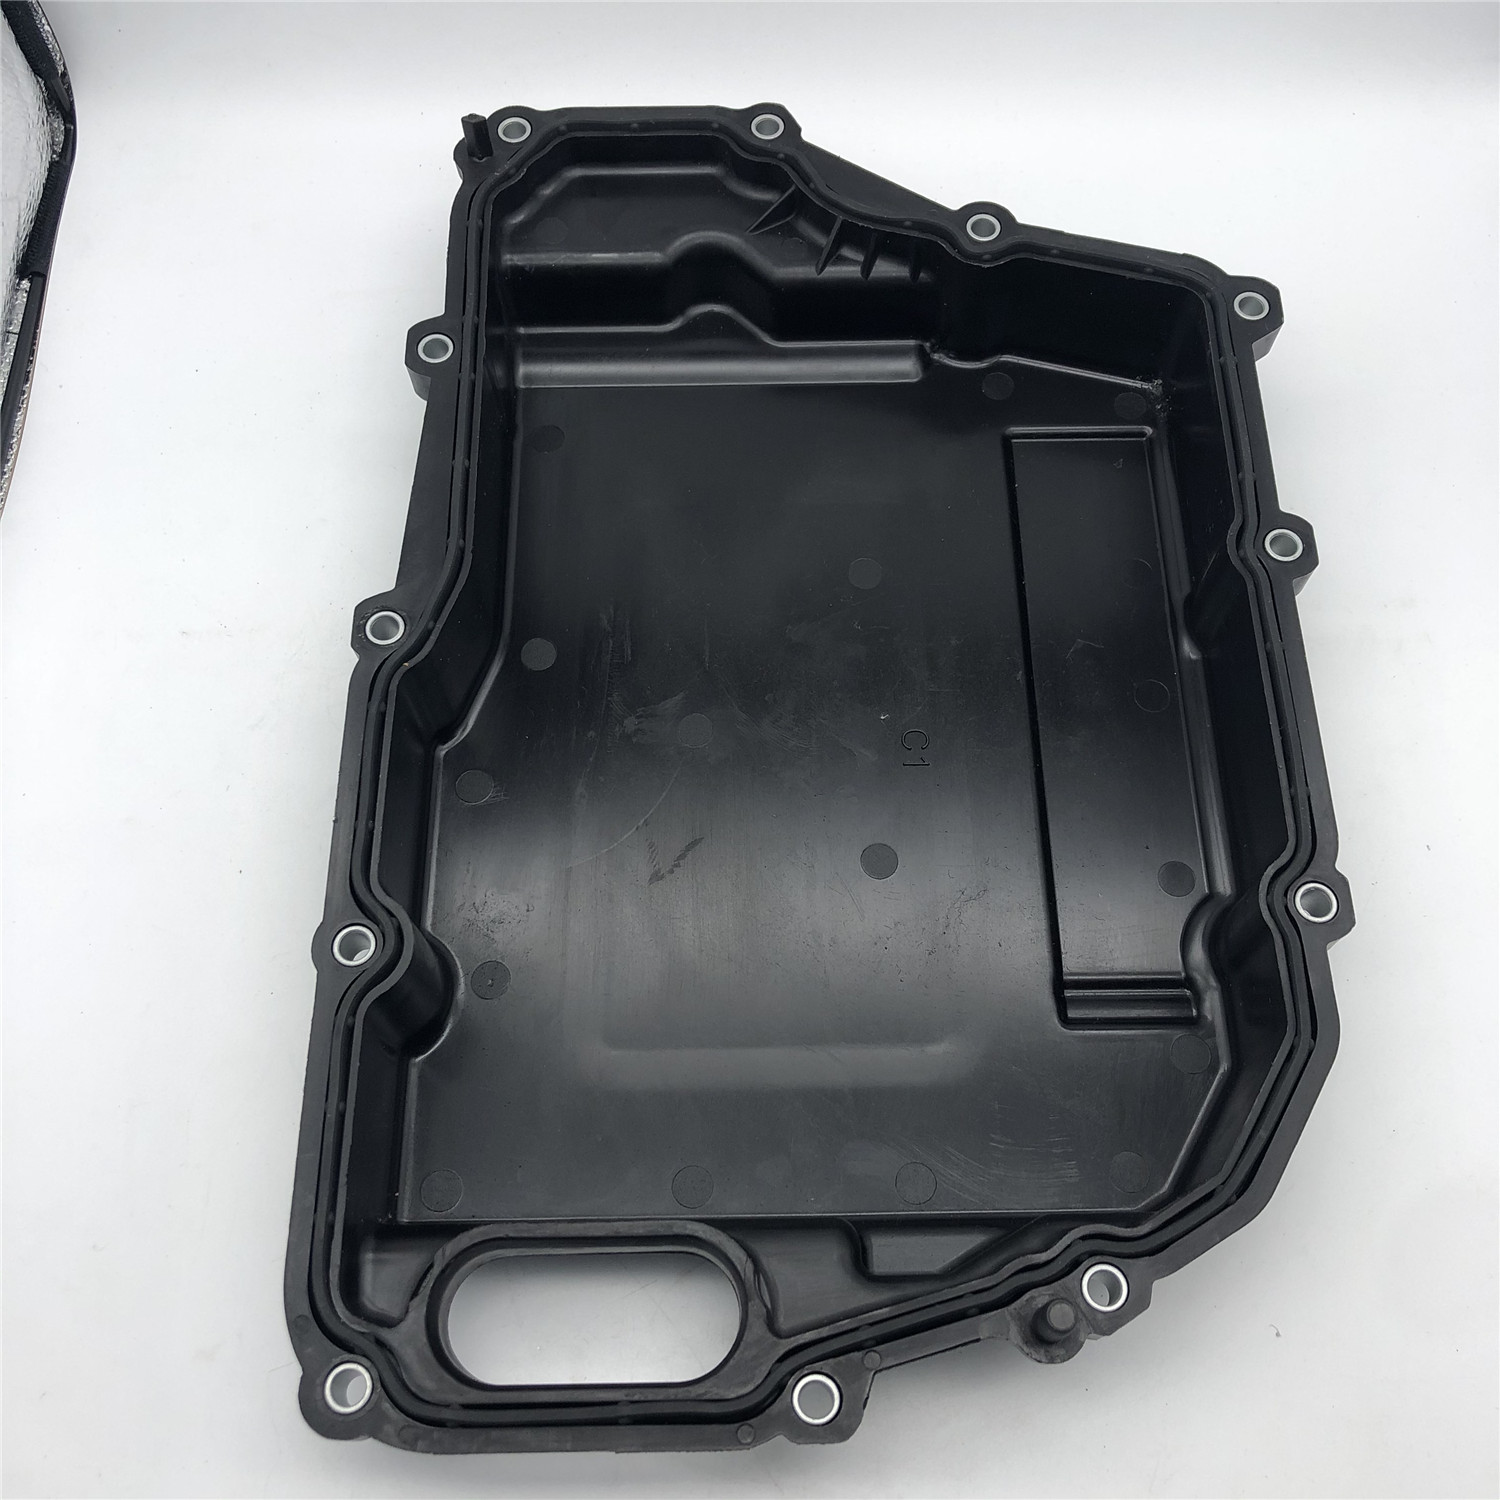 9T50-0007-AM GM 9T50 Automatic Transmission oil pan with gasket from aftermarket good quality For GM BUICK /Cadillac Chevrolet